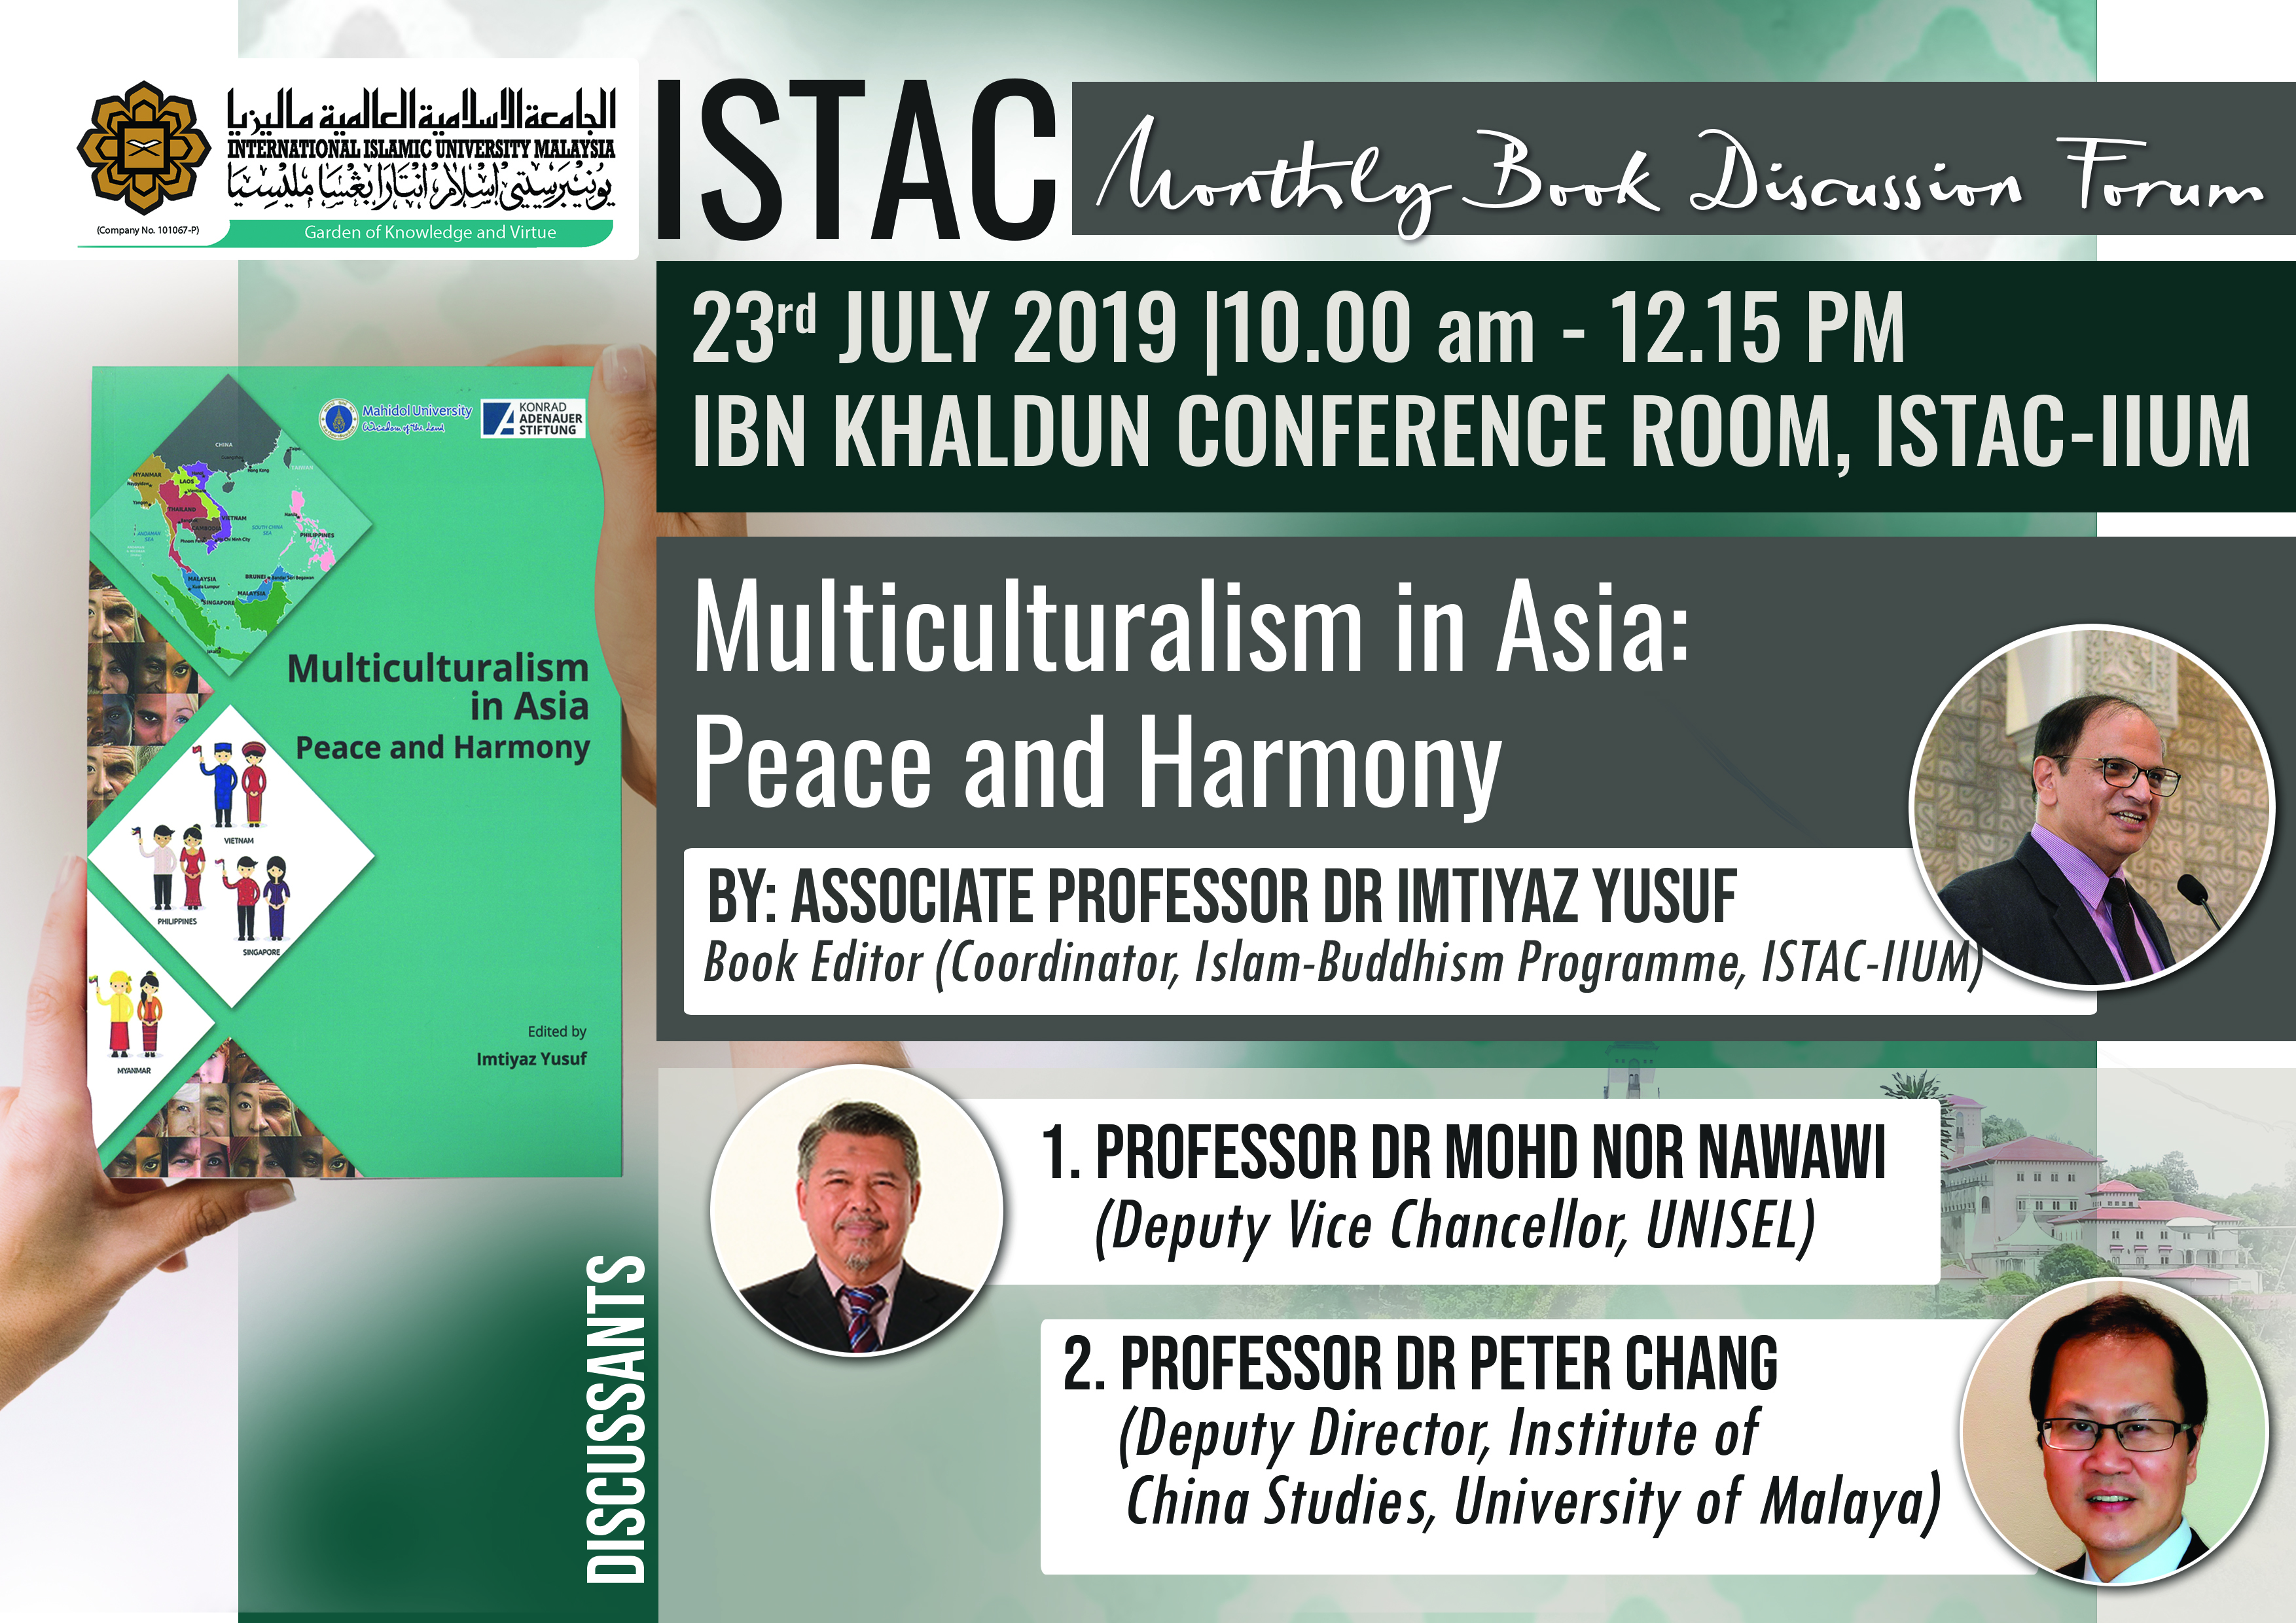 ISTAC MONTHLY BOOK DISCUSSION FORUM